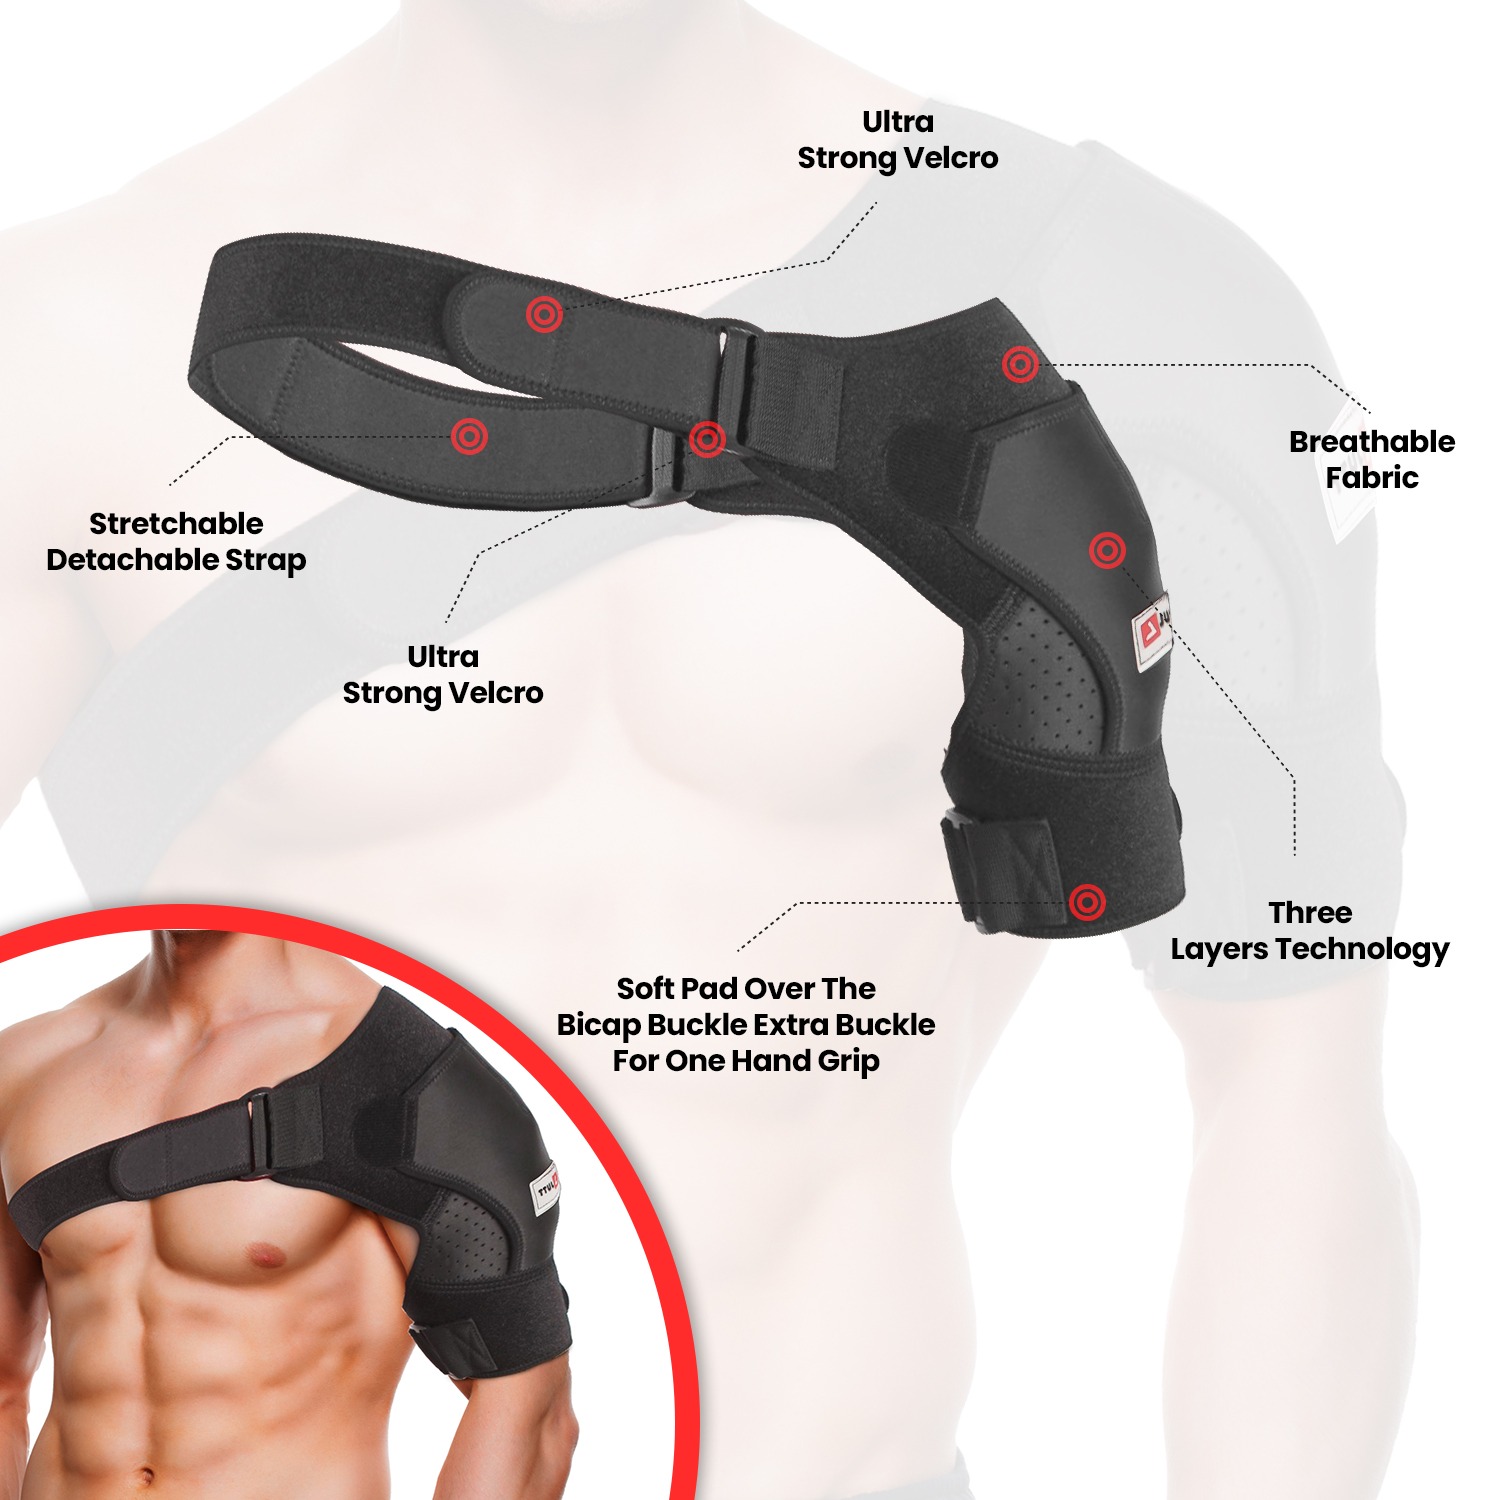 JUTT Adjustable Shoulder Support Brace For Men And Women Rotator Cuff for Dislocated Joints, Frozen Arm and Muscle Pain Relief, Fits Both Right or Left